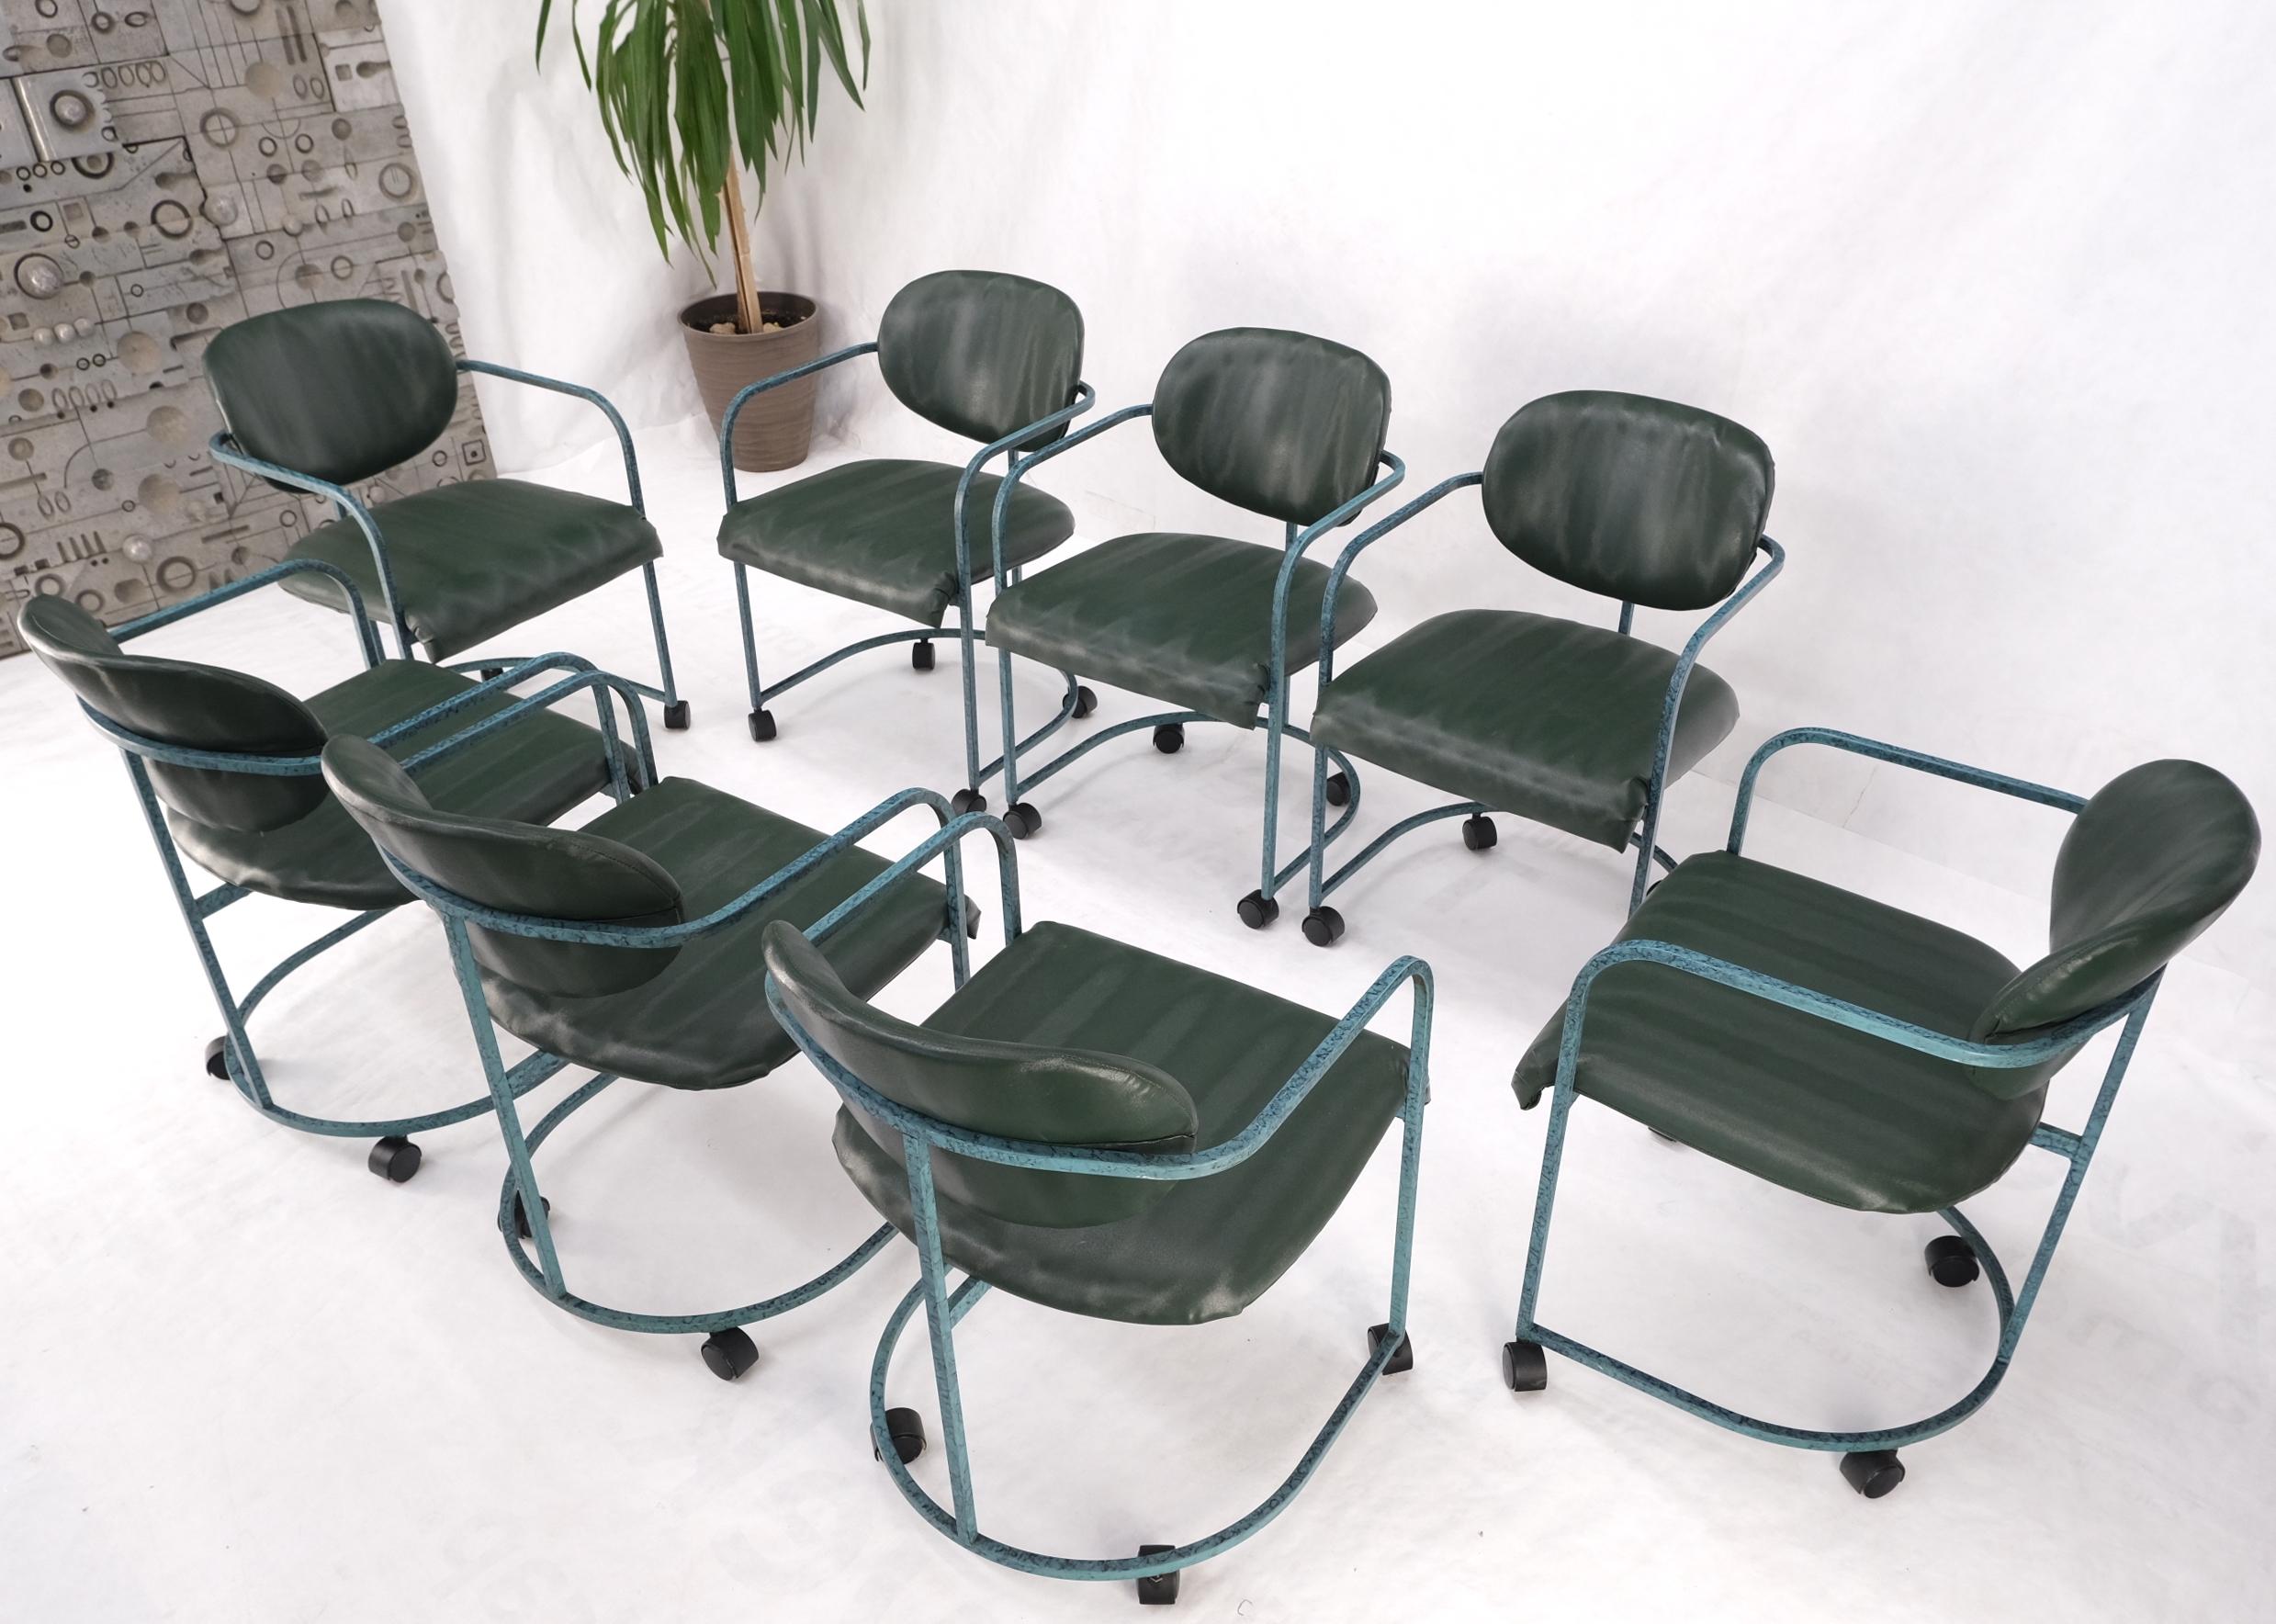 DIA set of green upholstery mid century dining office chairs on wheels.